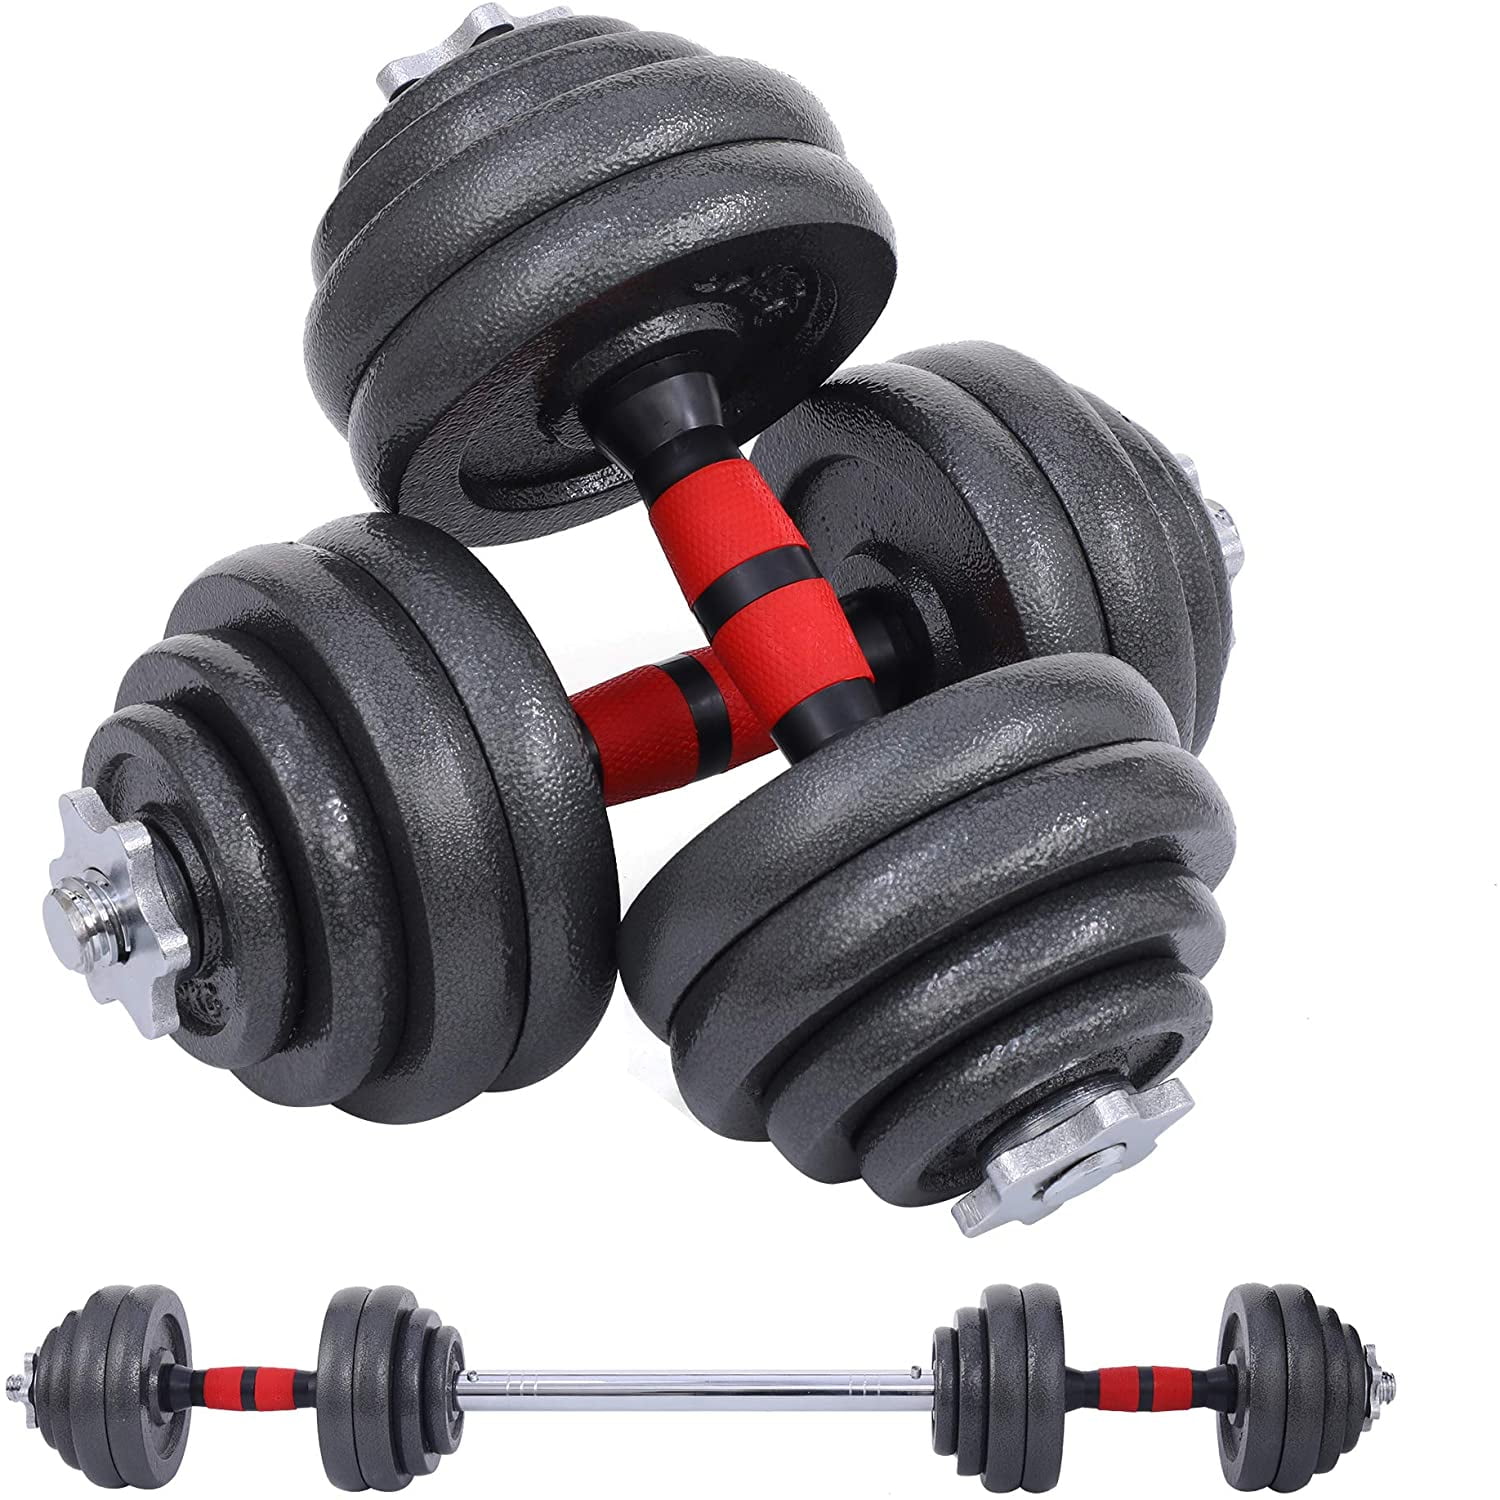 22/44/88lb Adjustable Dumbbell Set Weight Barbell Plates GYM Home Workout 